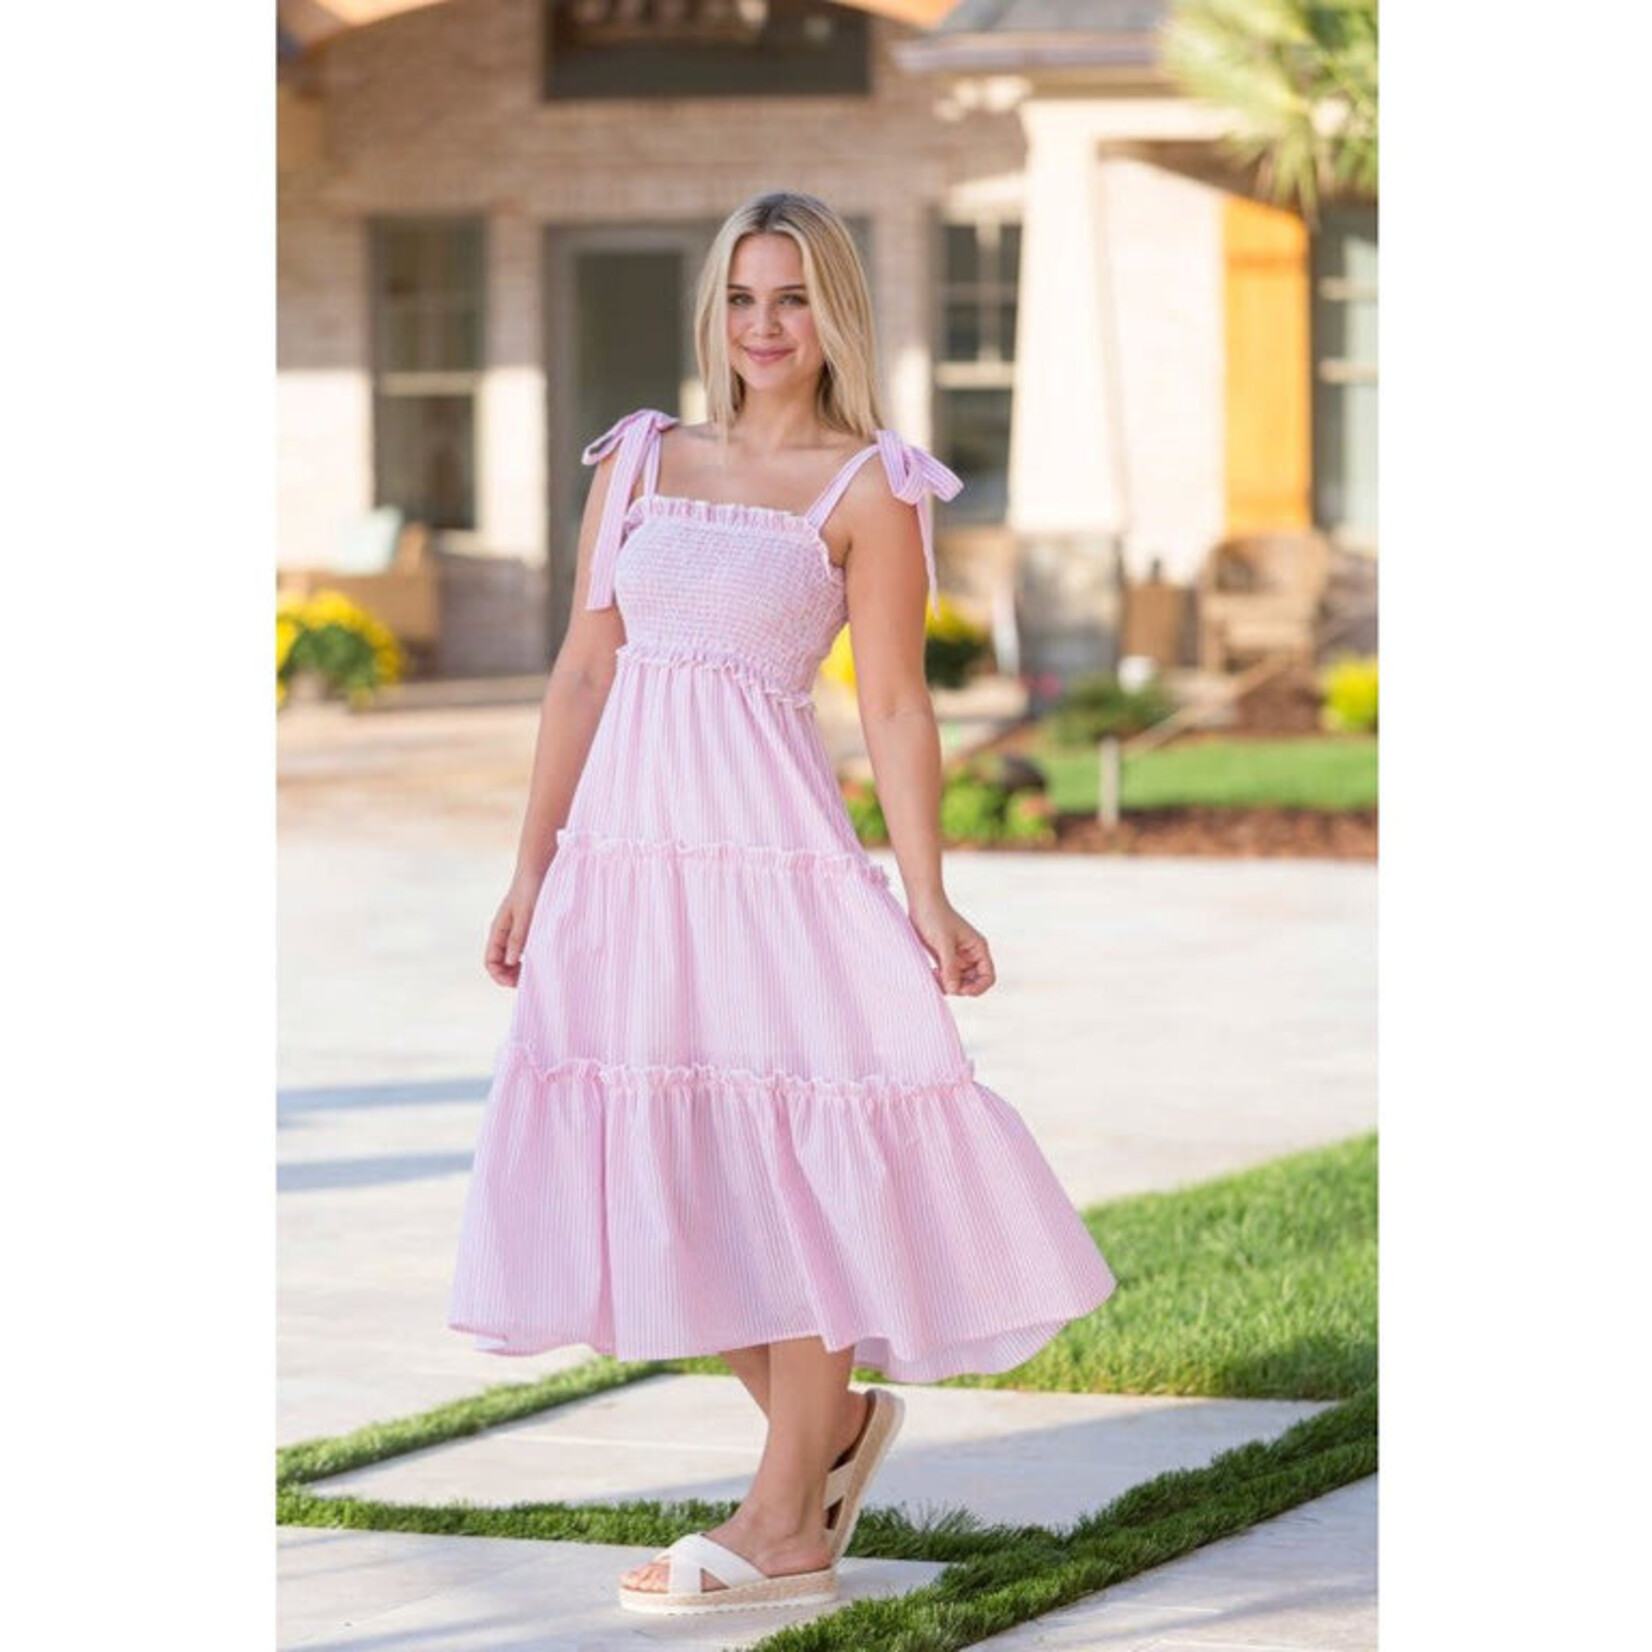 Simply Southern Simply Southern Pink Seersucker Dress